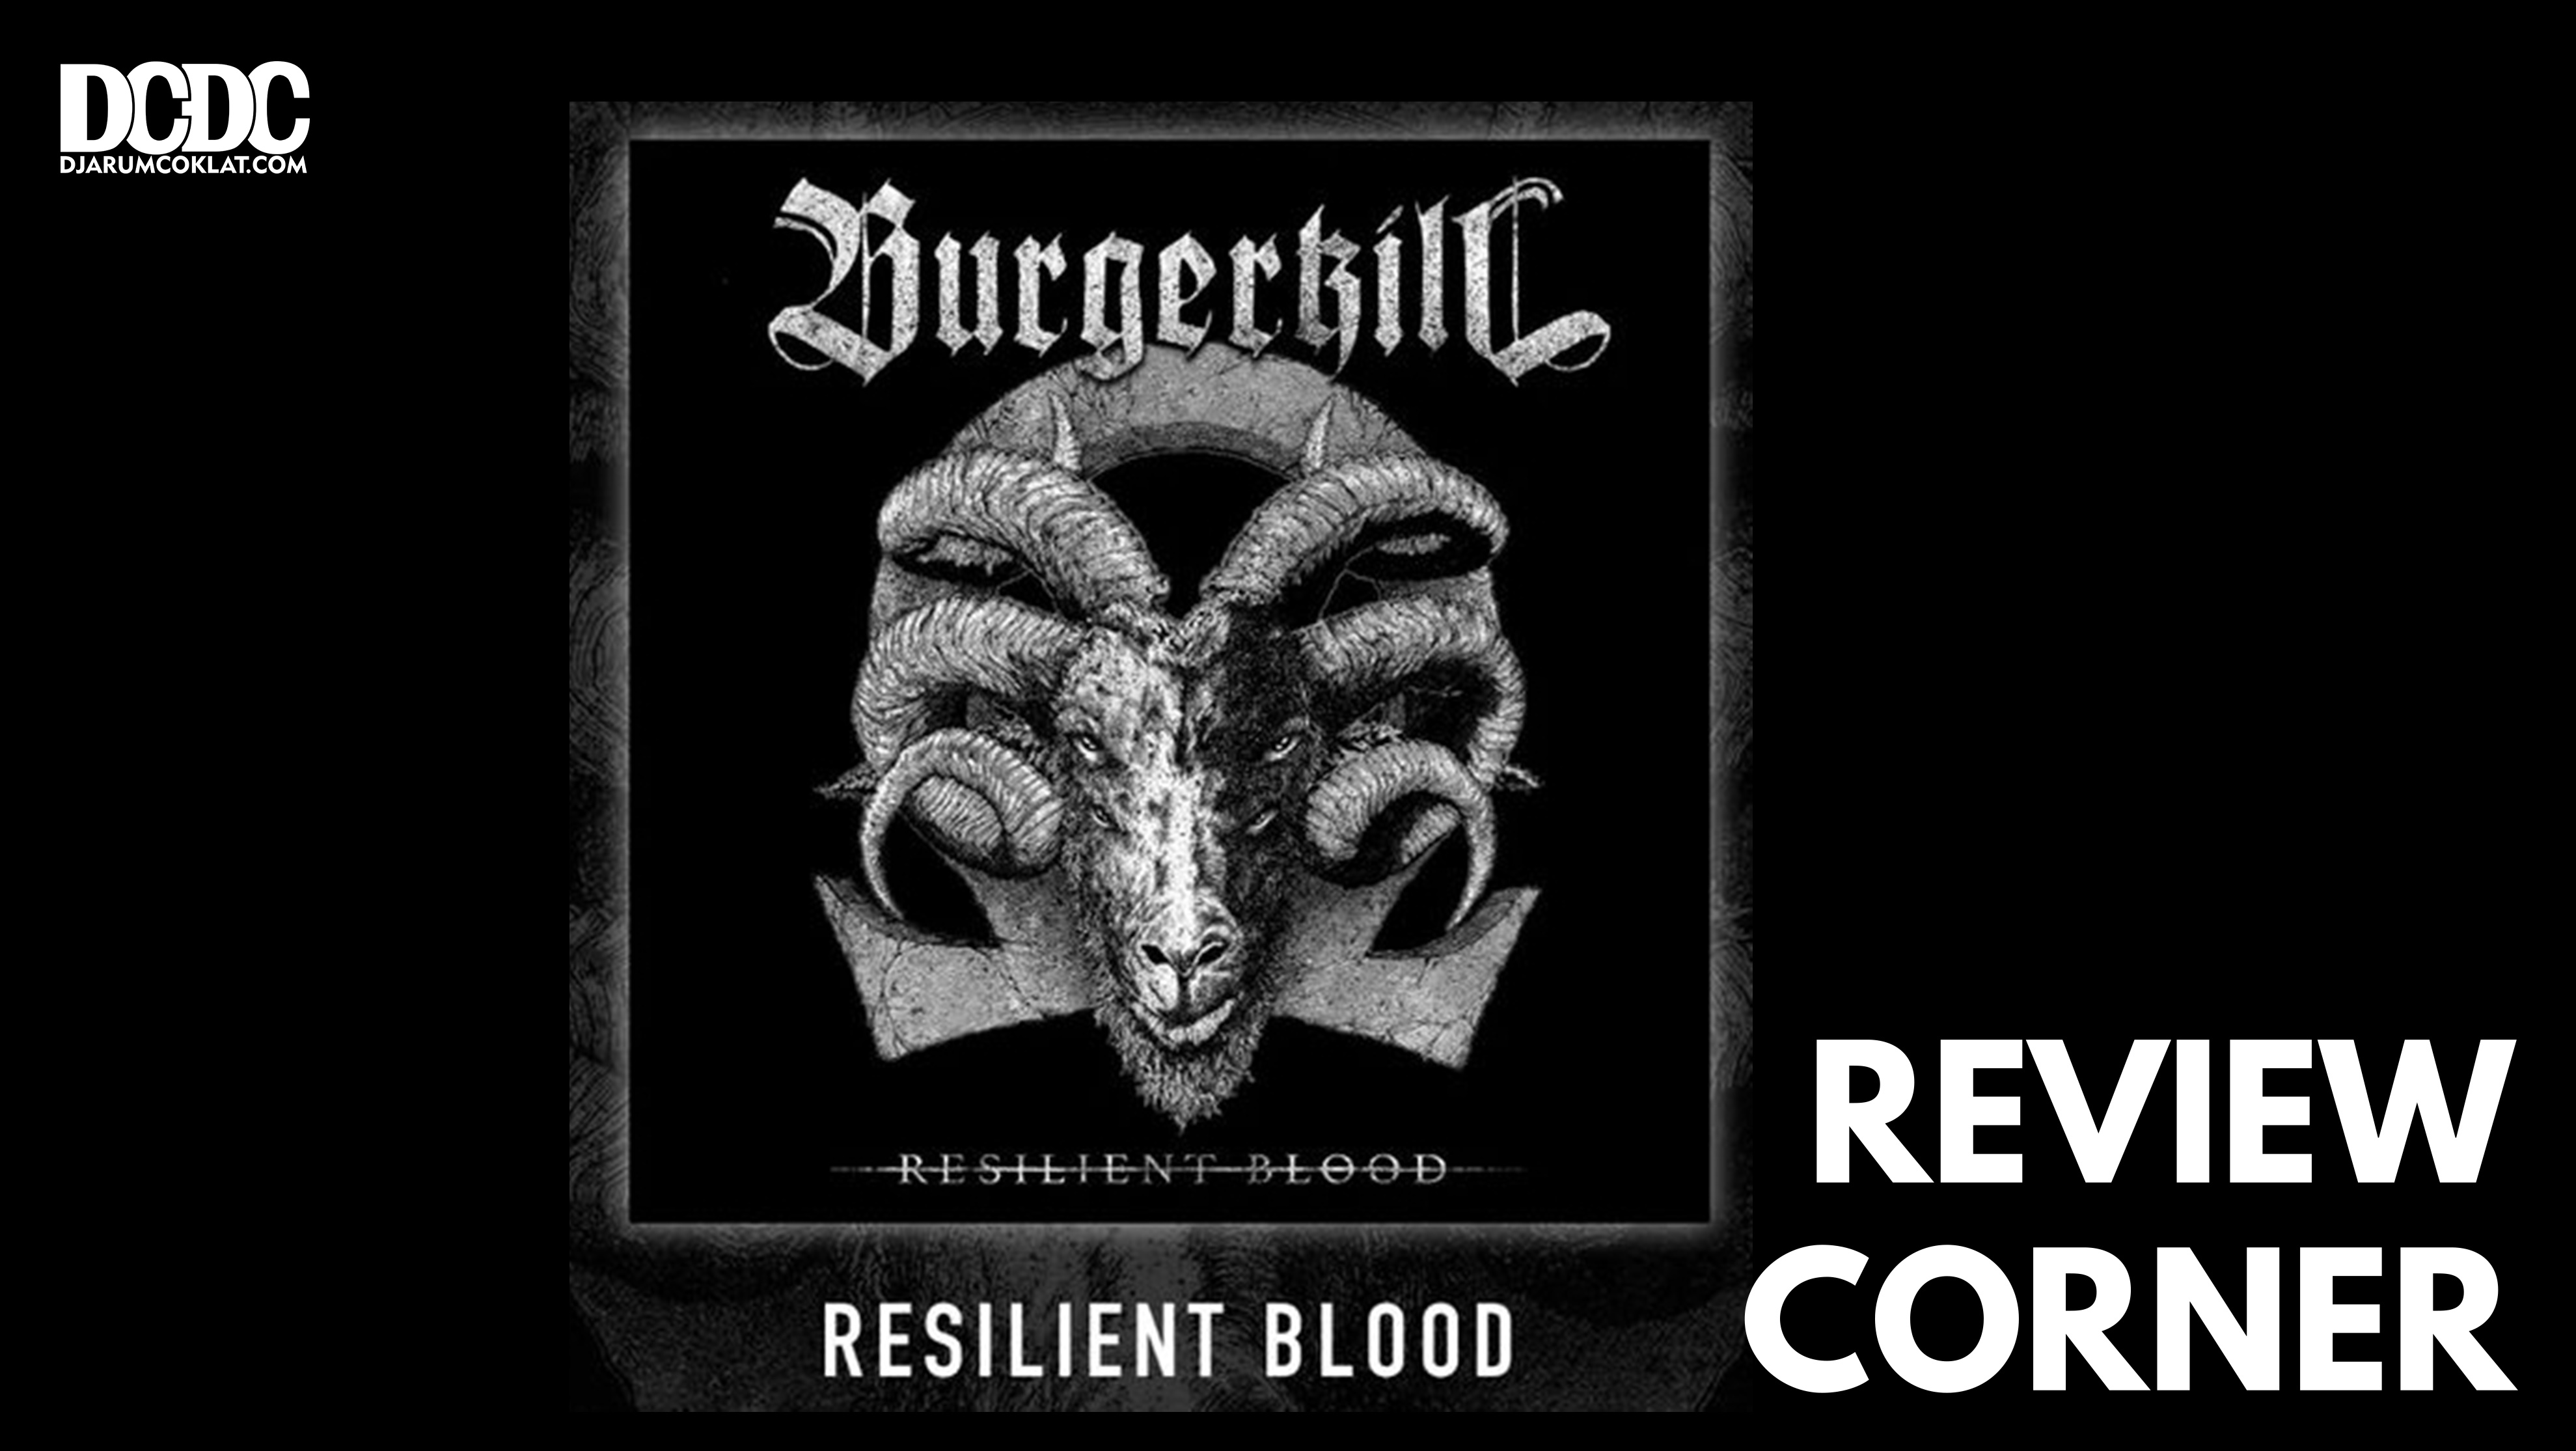 Song Review : Burgerkill - “Resilient Blood”